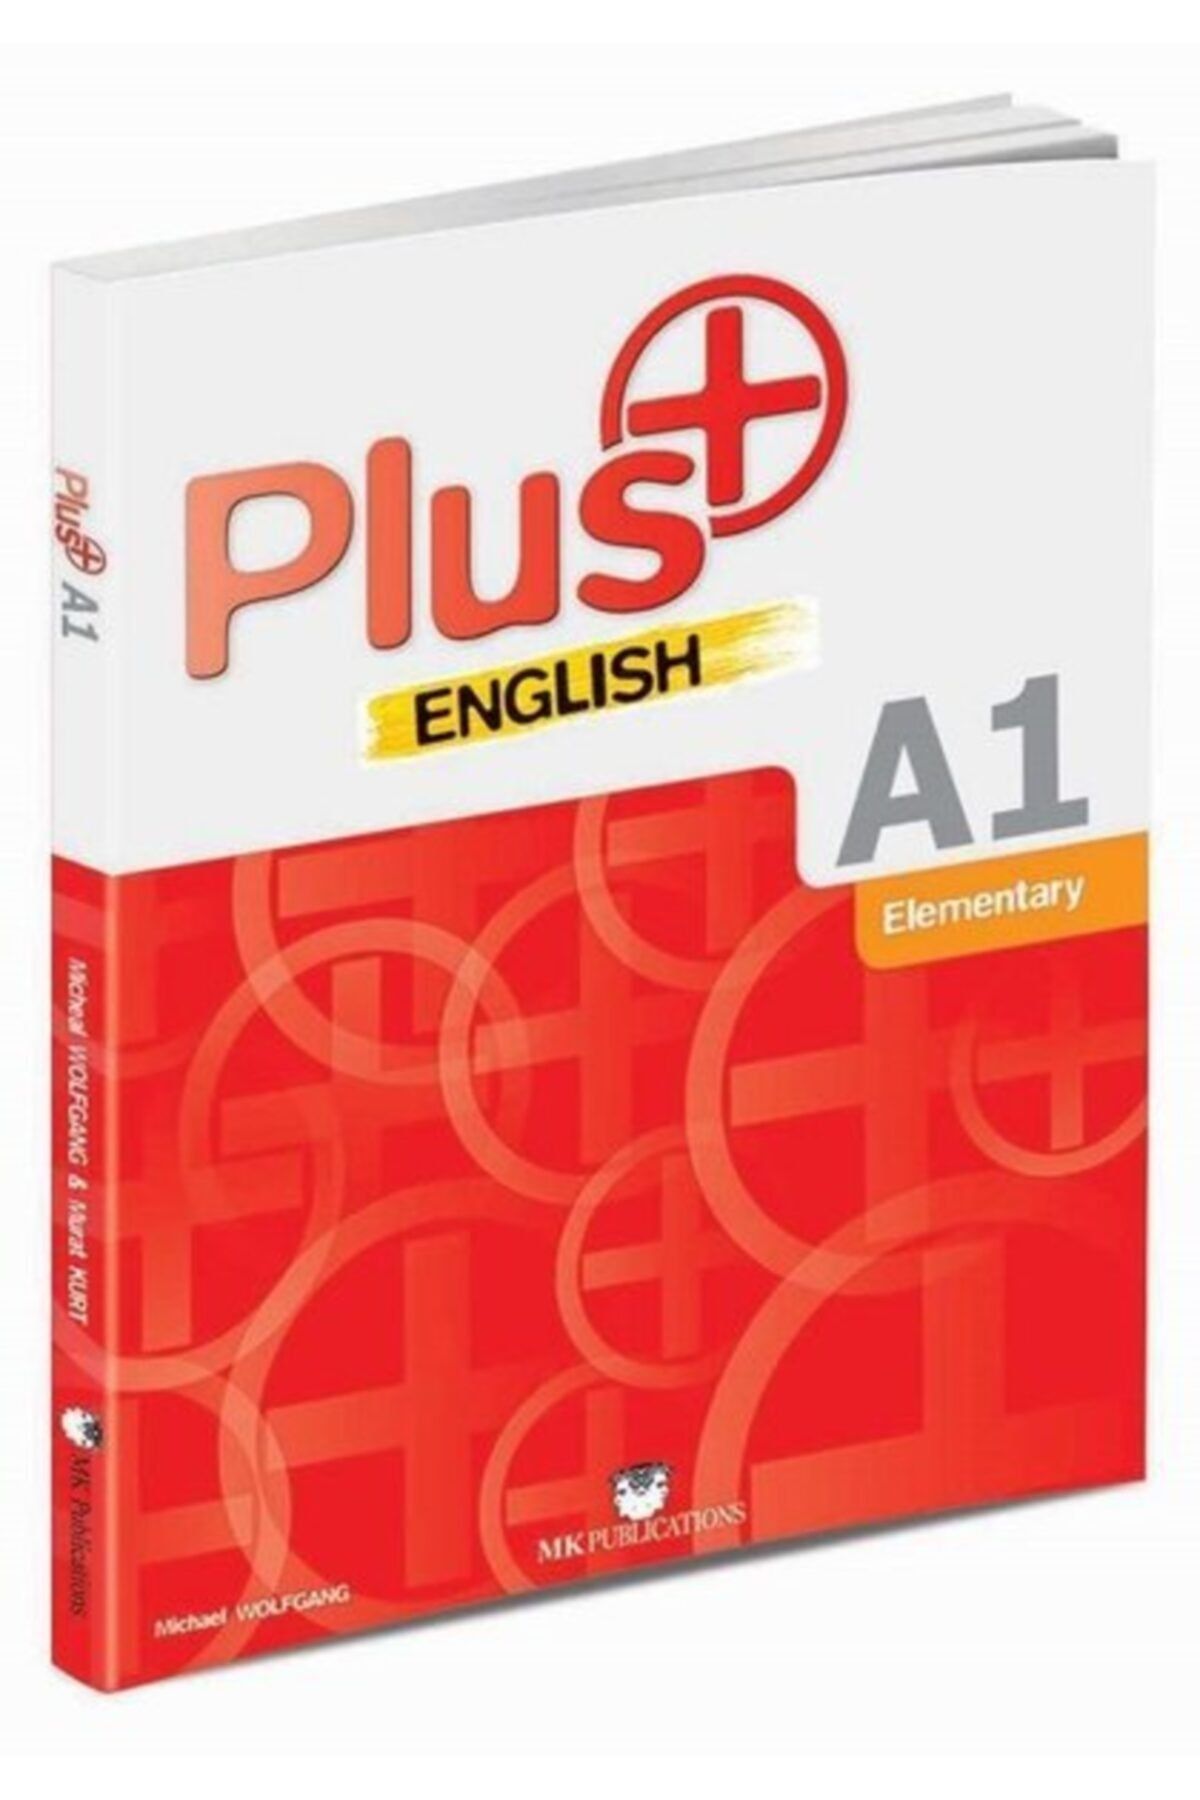 MK Publications - Plus English A1 Elementary / Micheal Wolfgang